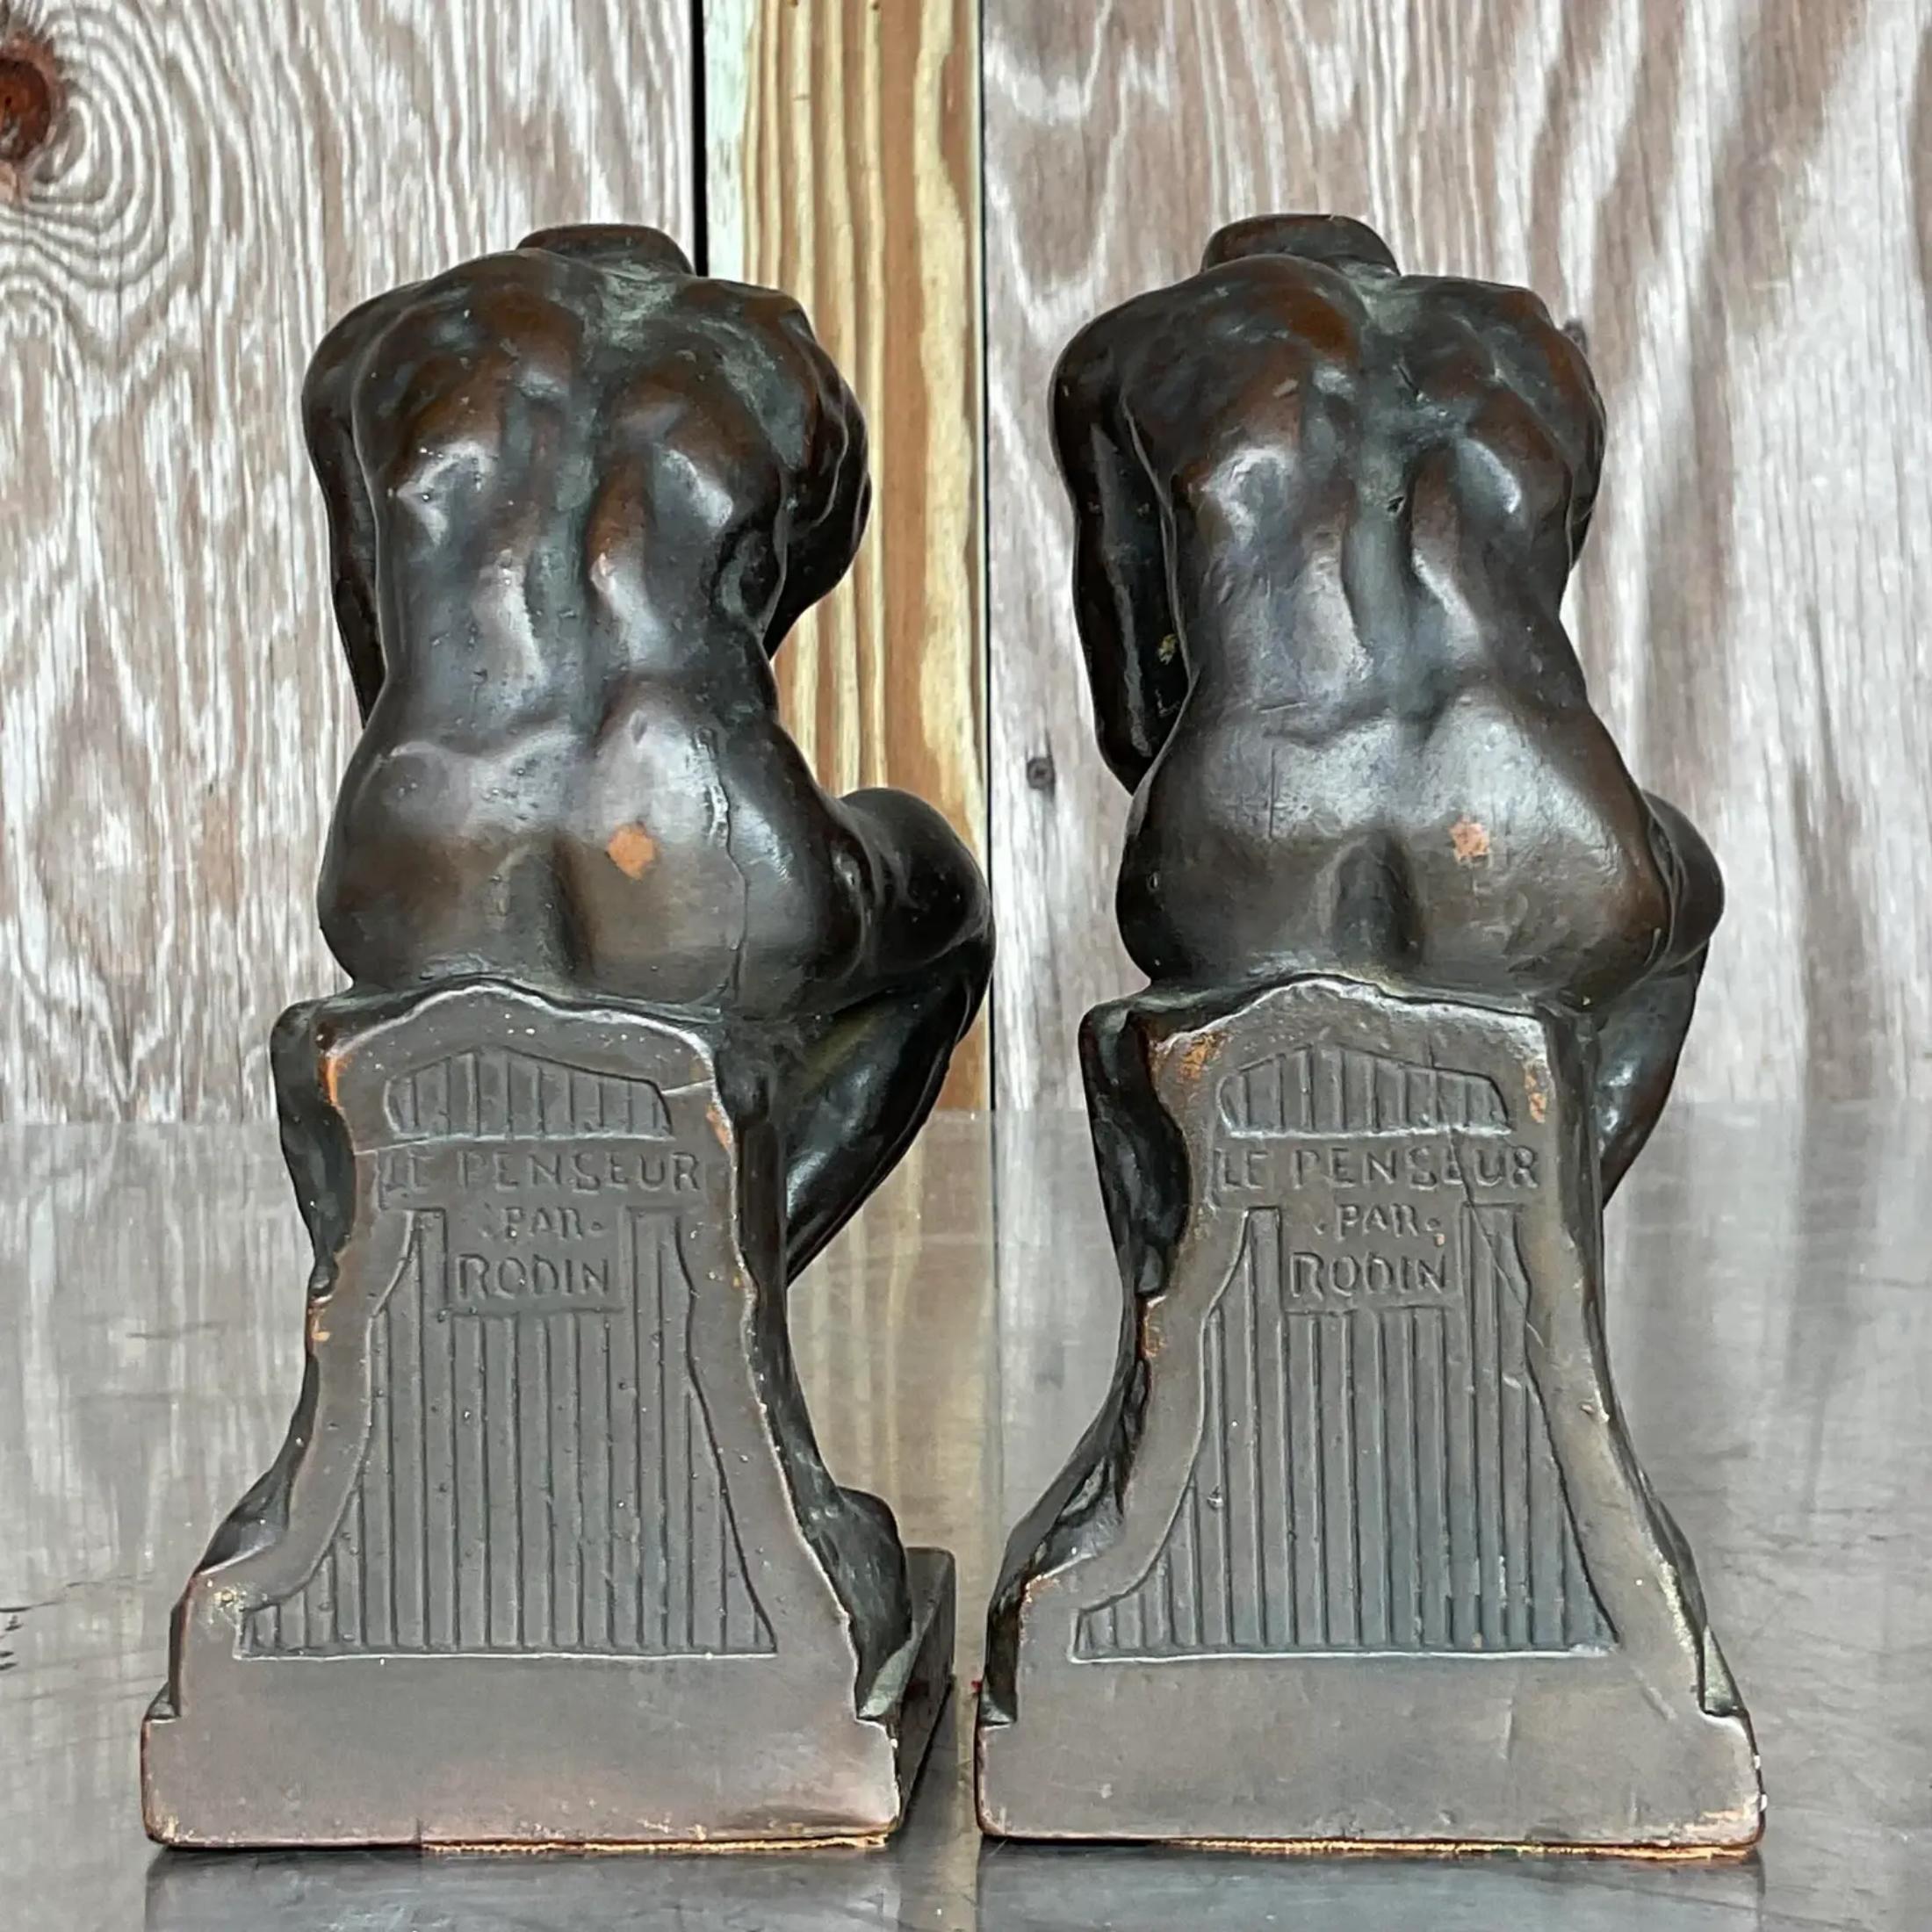 Vintage Regency Patinated Plaster Agusta Rodin “The Thinker” Bookends - a Pair For Sale 1